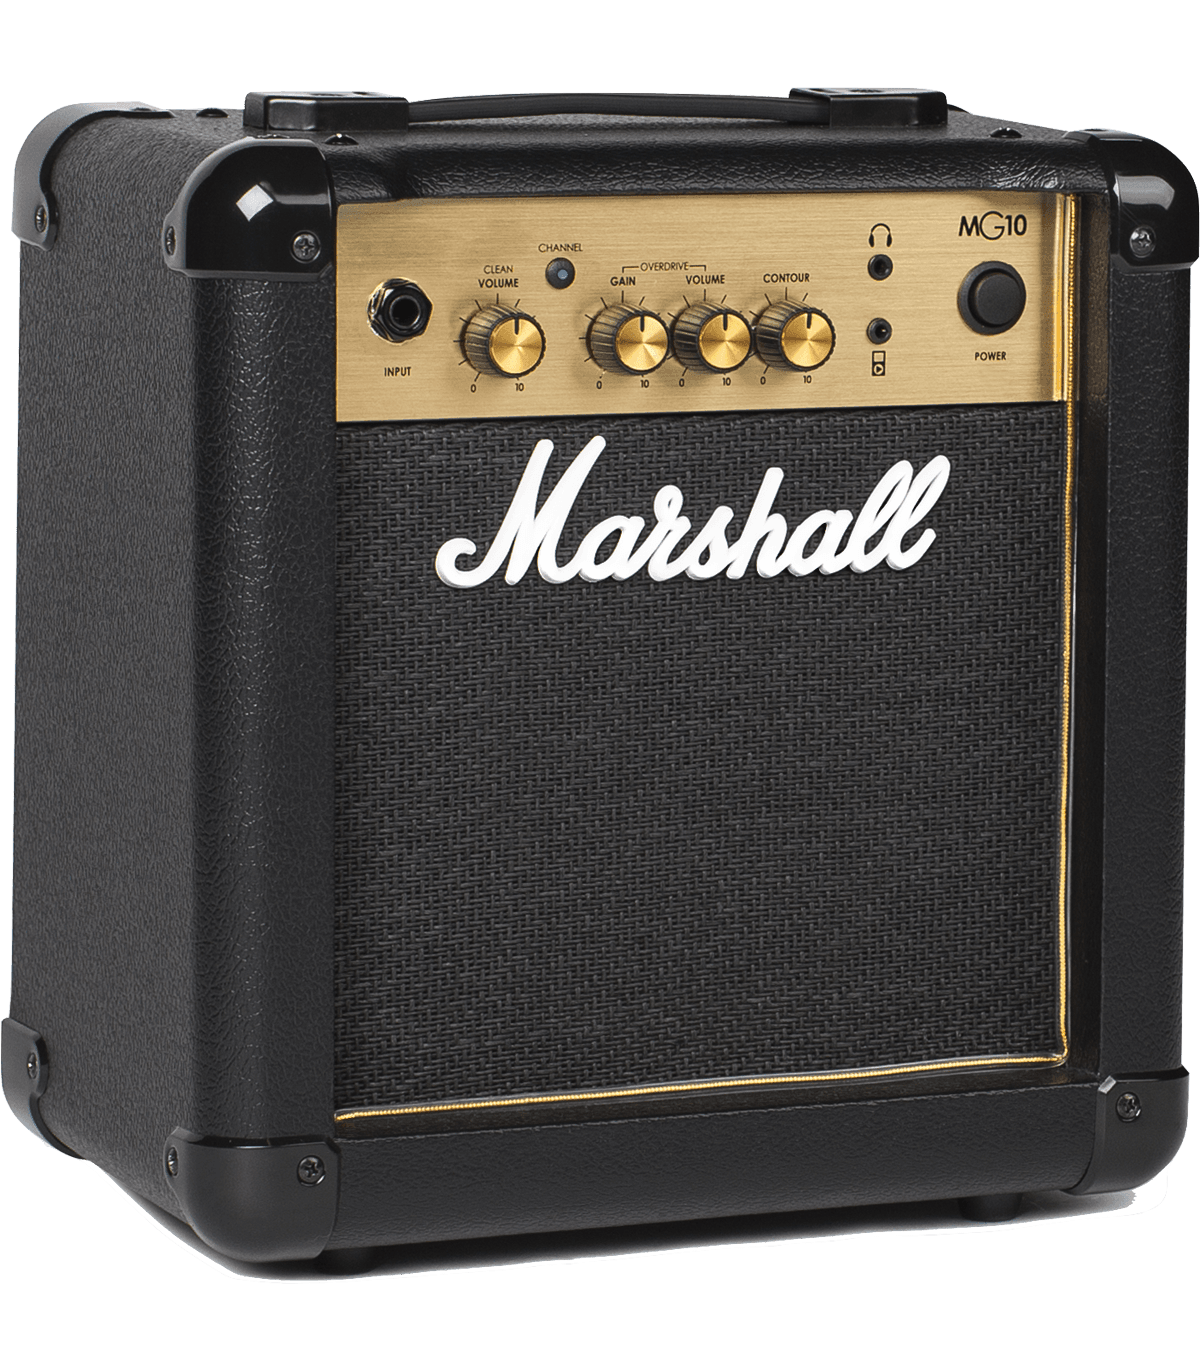 Ampli pour Guitare Electrique MARSHALL - MG10G - MG GOLD - Combo 10 W